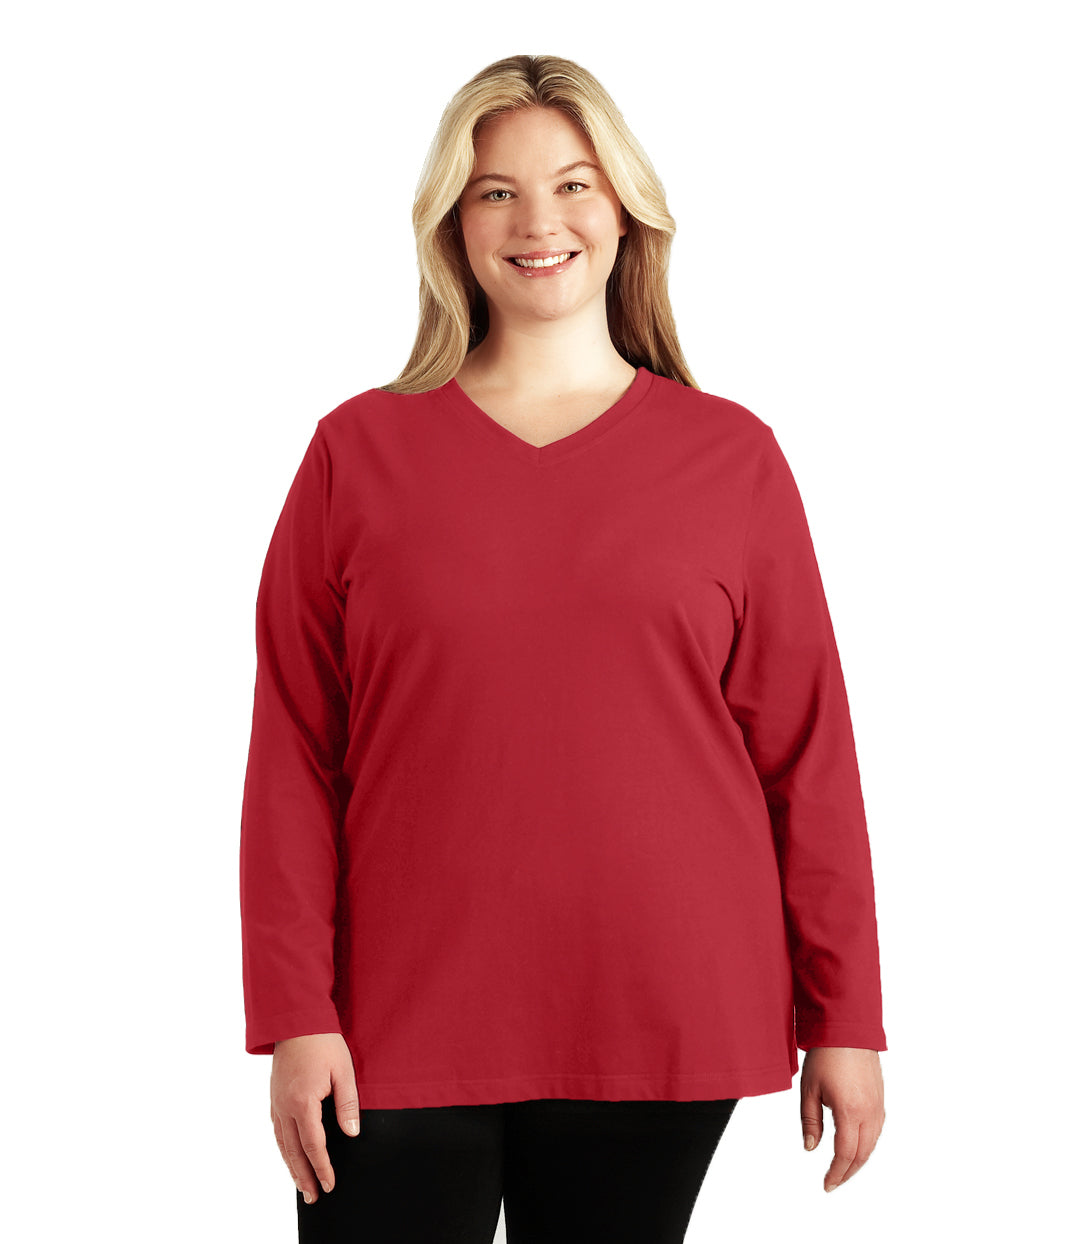 Plus size woman, facing front, wearing JunoActive plus size Stretch Naturals Long Sleeve V-Neck Top in the color Lucky Red. She is wearing JunoActive Plus Size Leggings in the color Black.